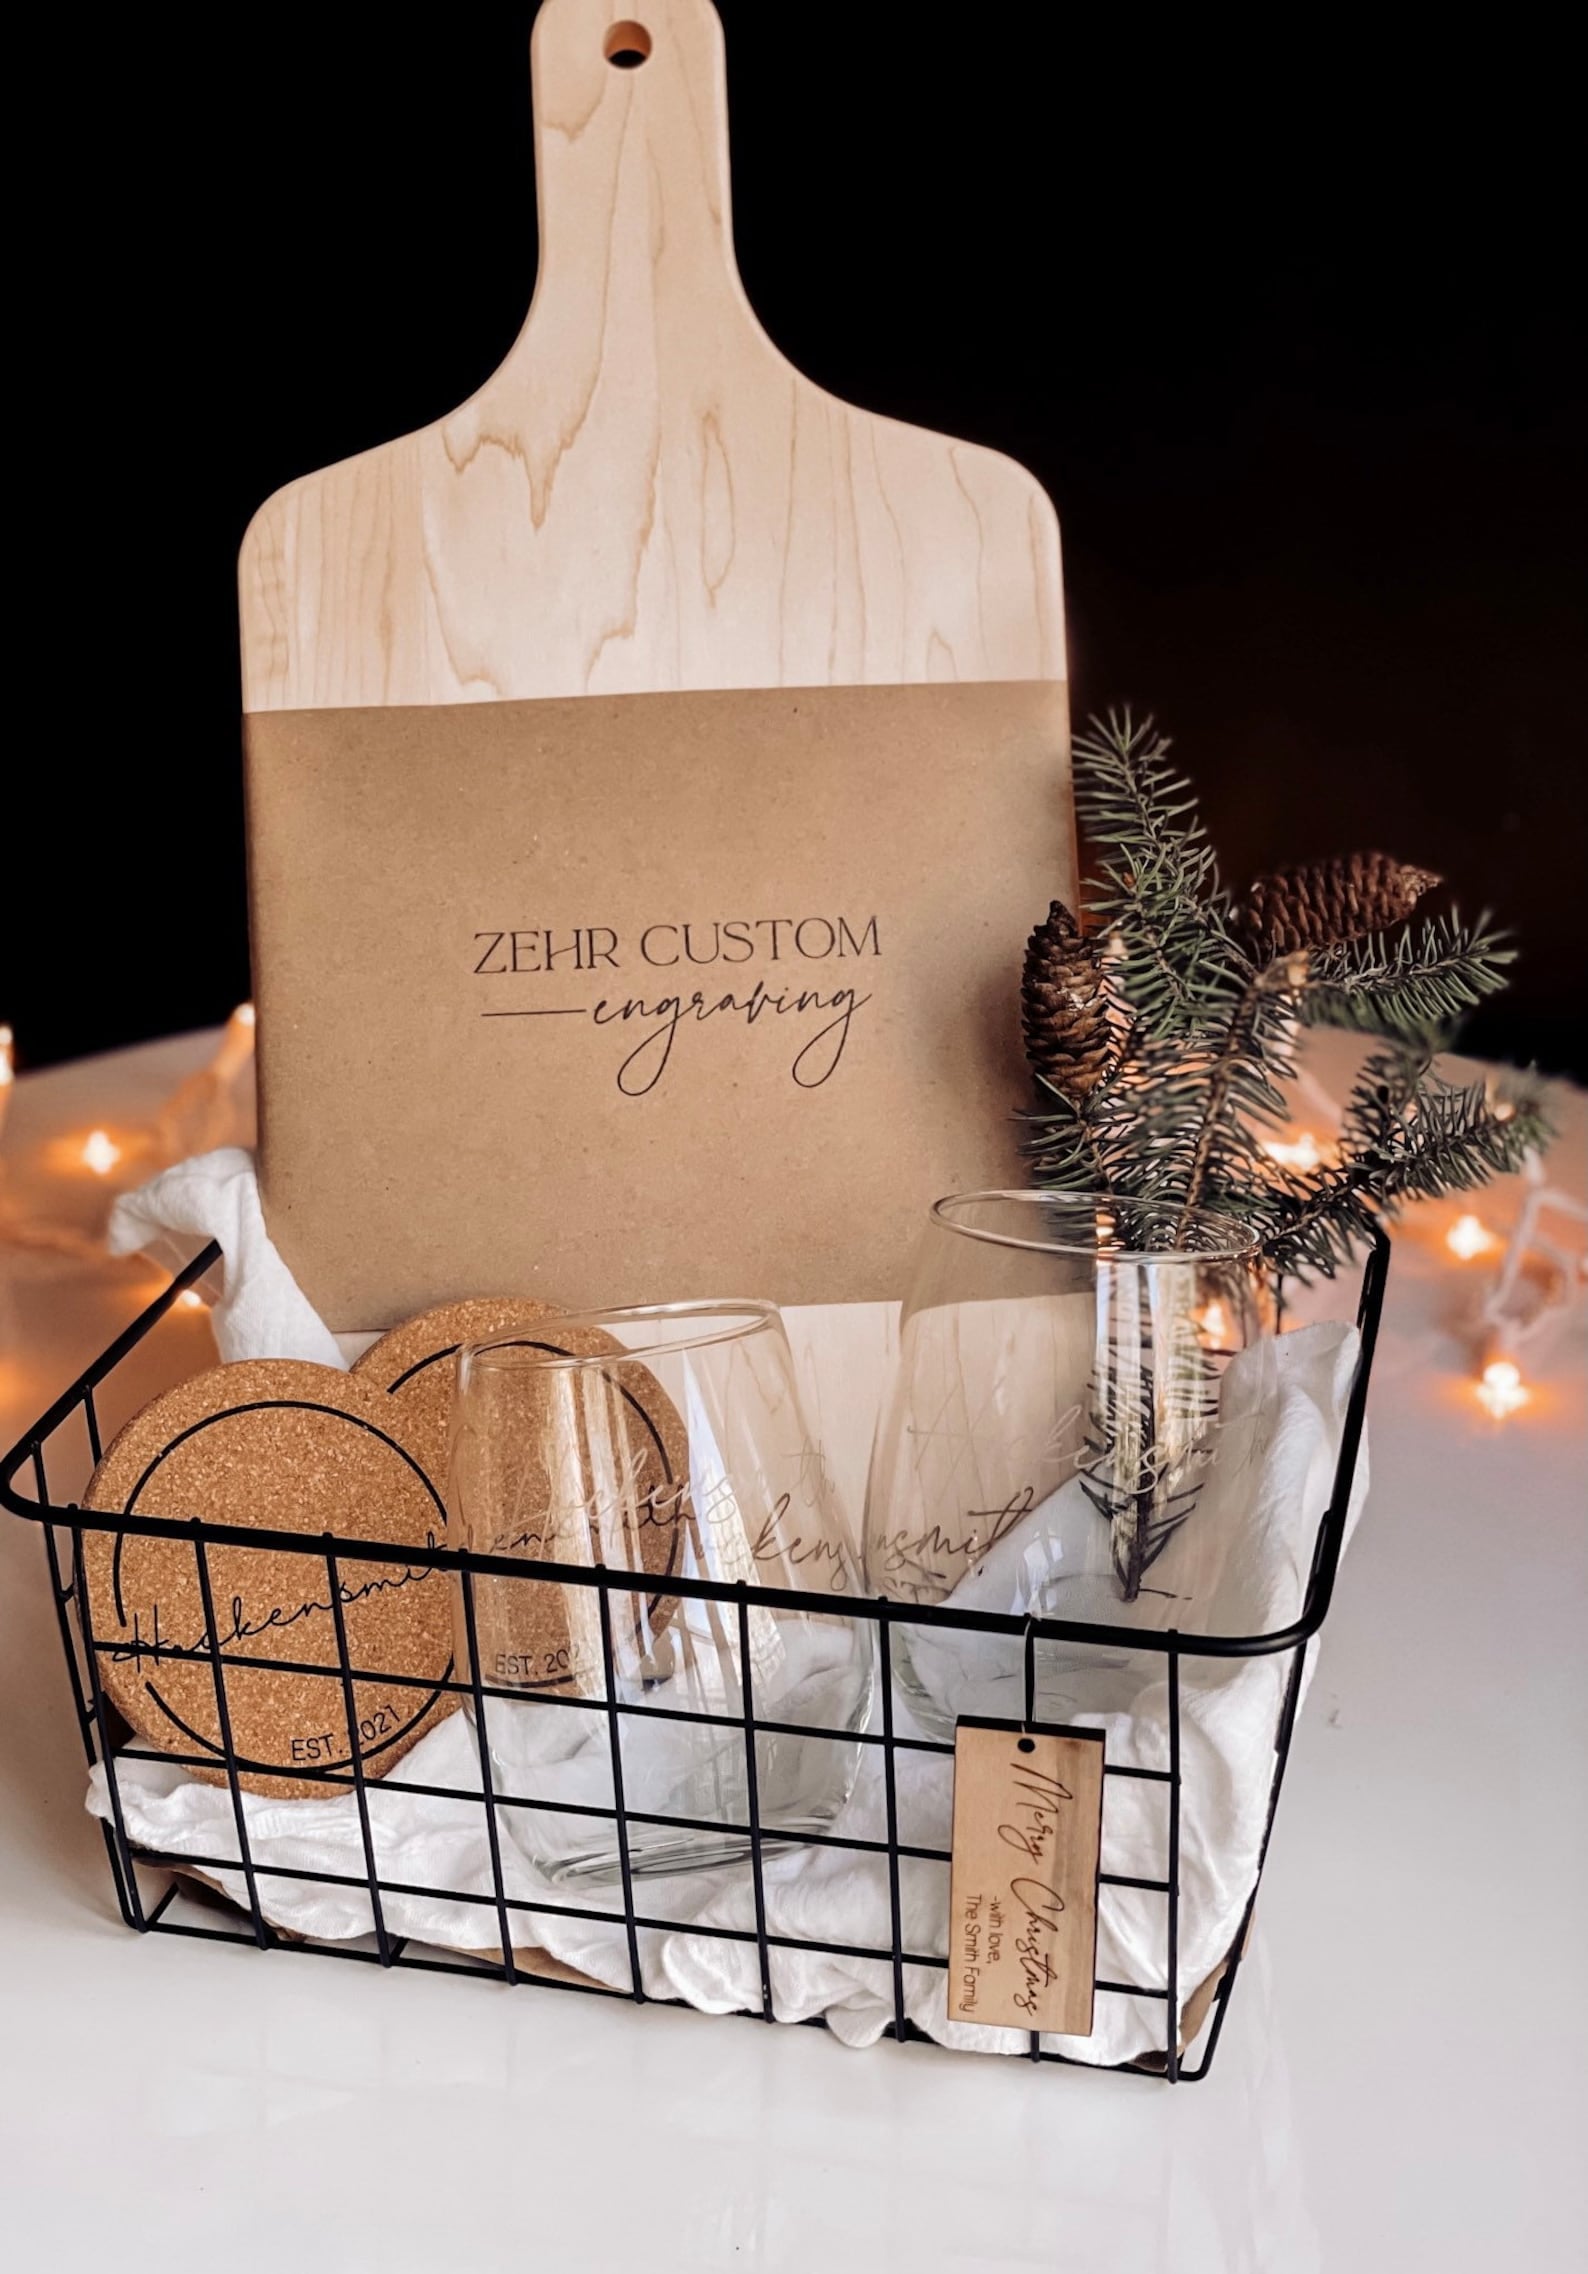 Black basket with engraved wine glasses, engraved cork coasters, and an engraved charcuterie board on top of a white table with twinkle lights